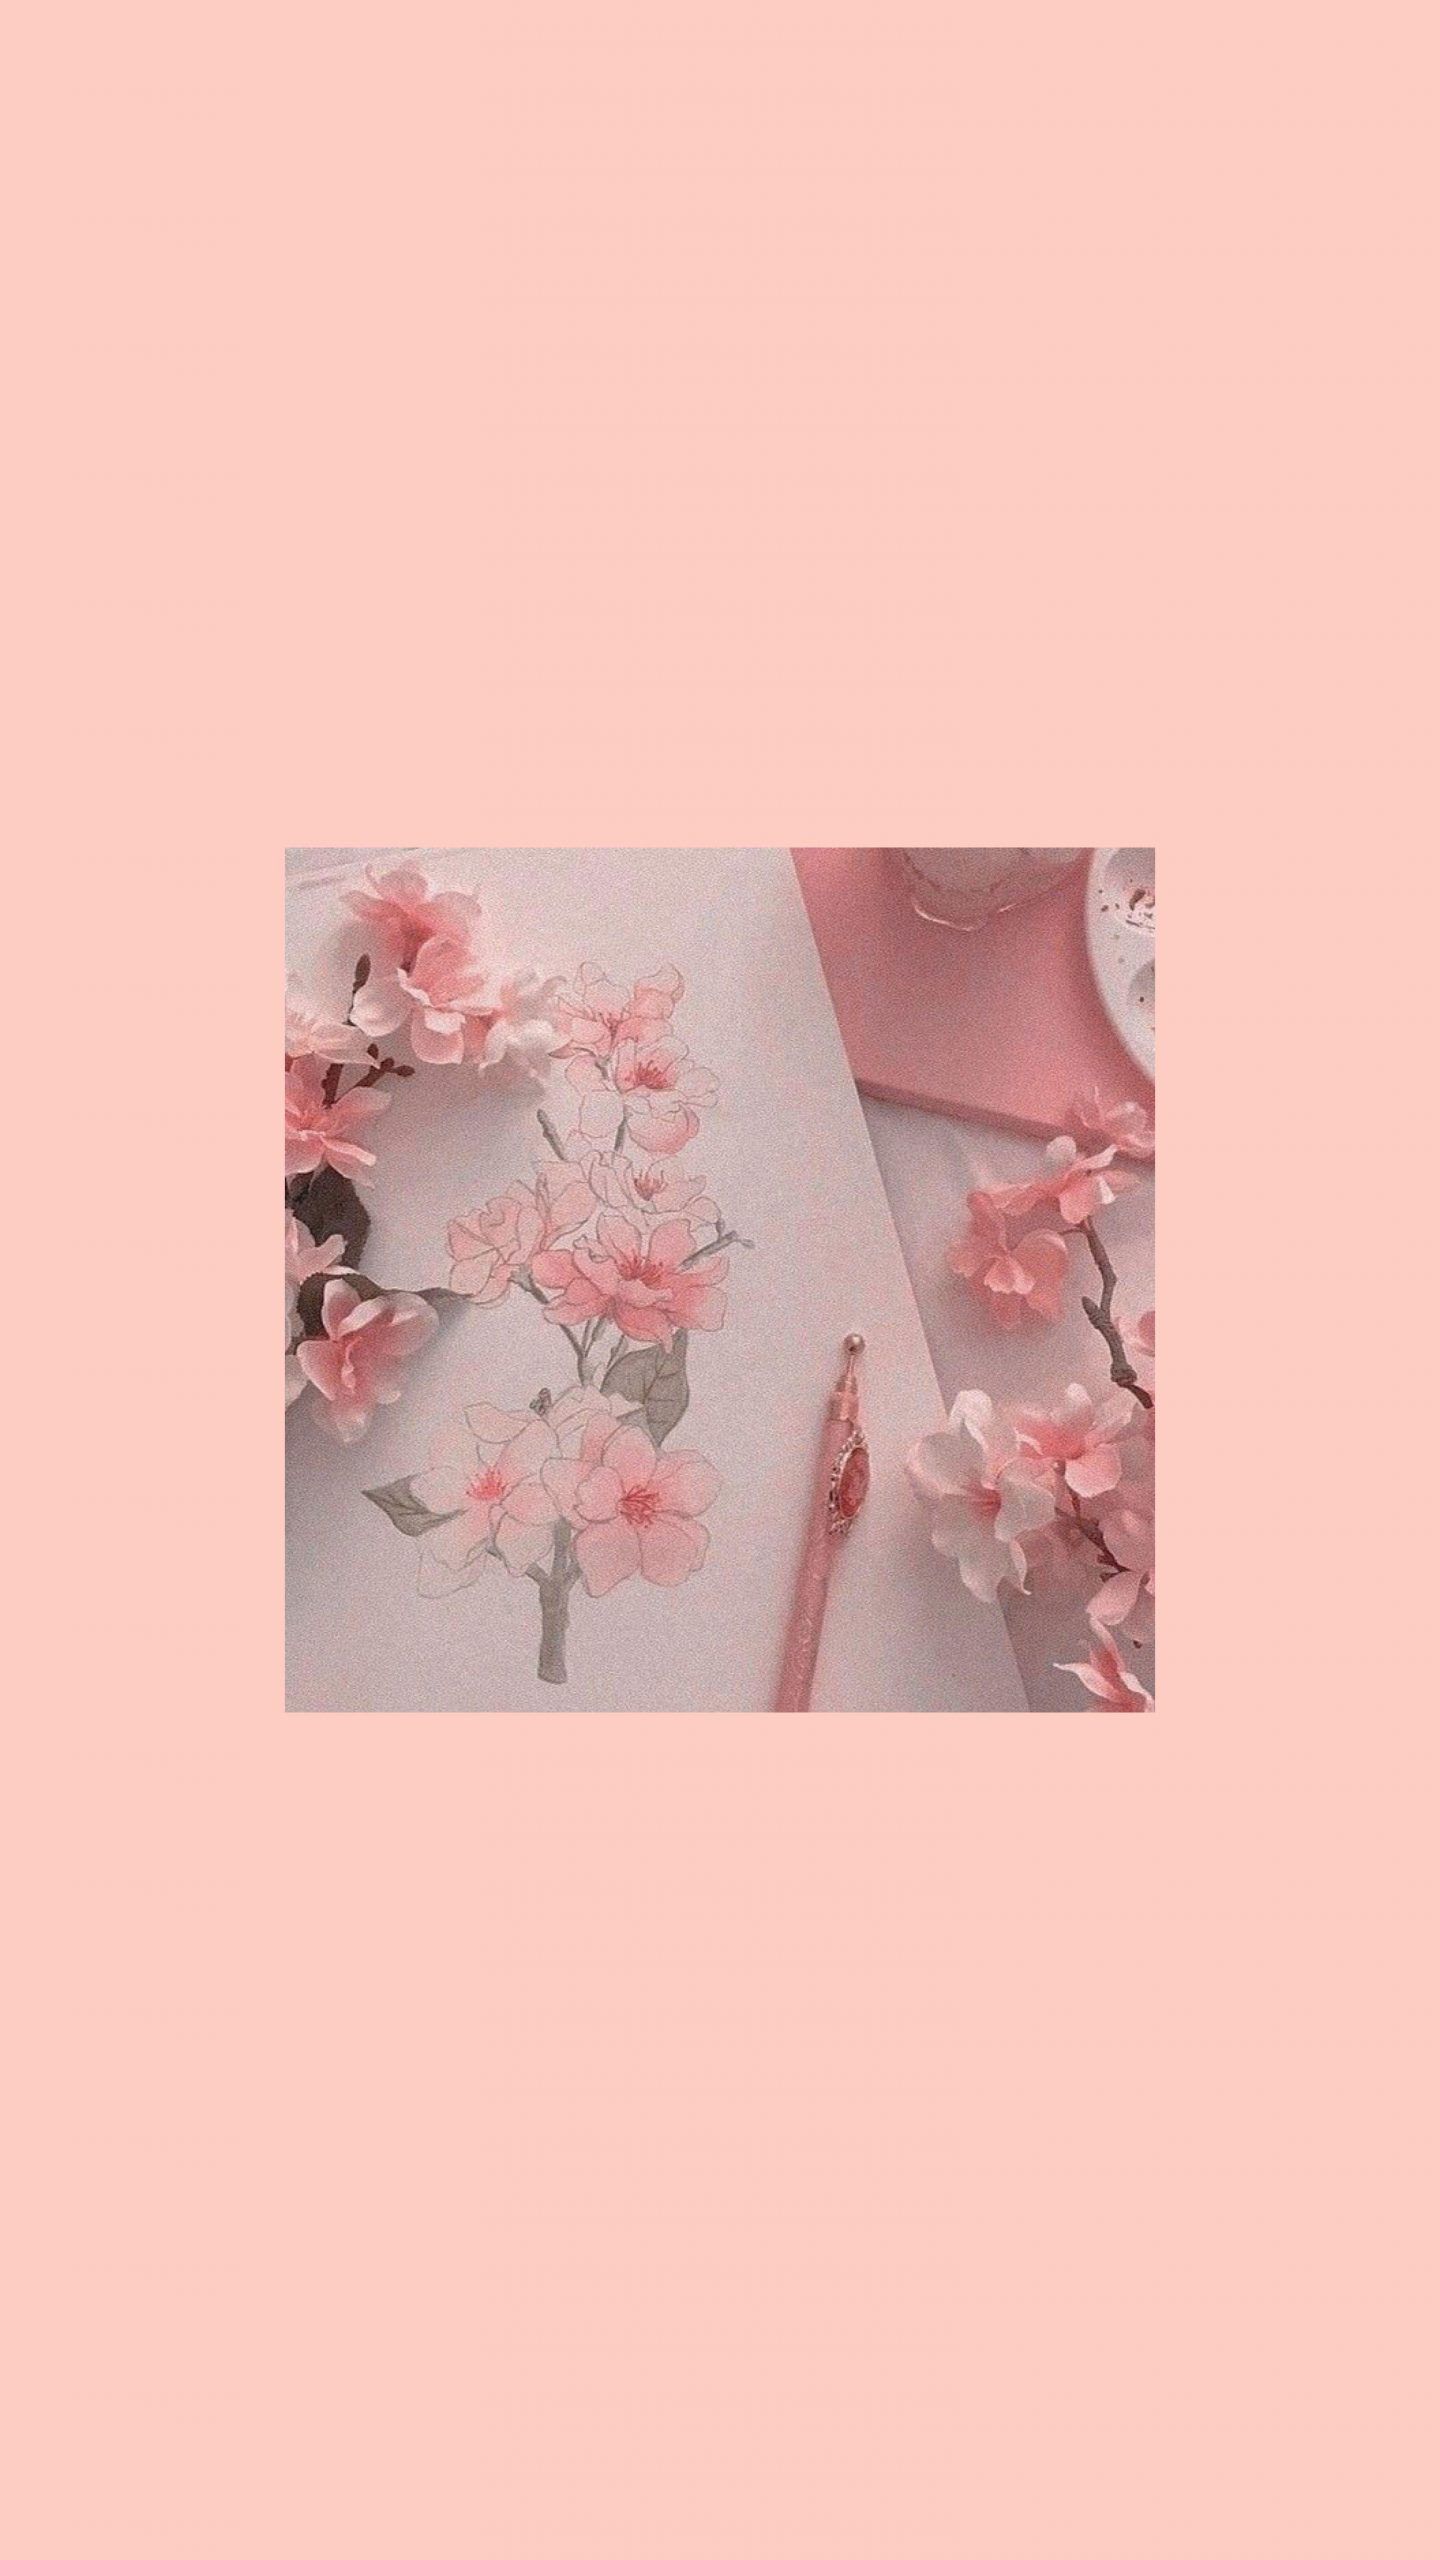 A pink background with flowers and tea - Peach, paper